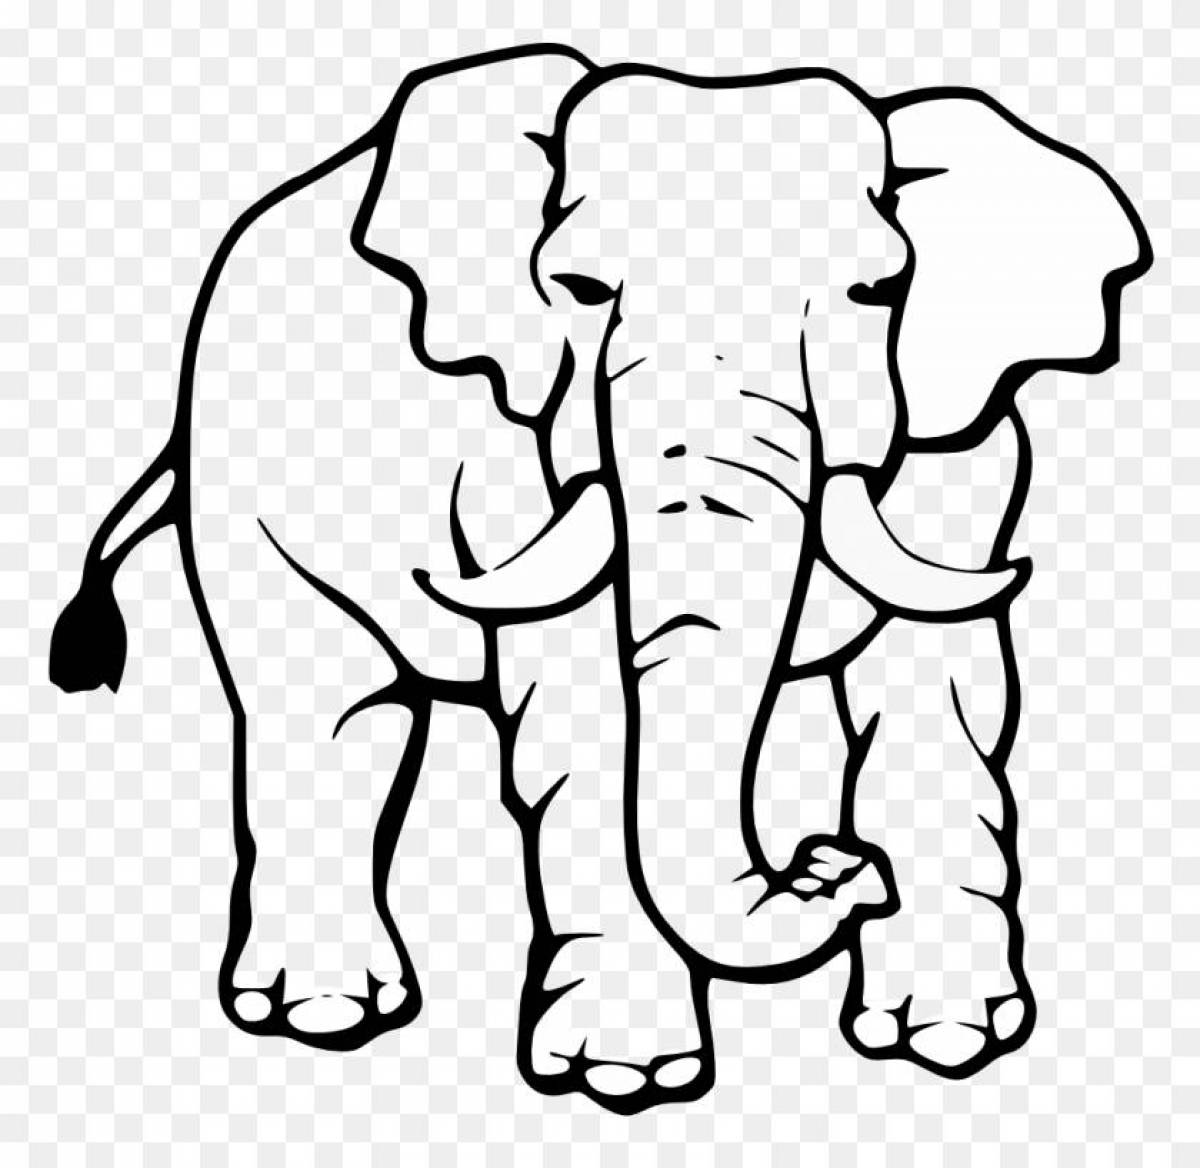 Amazing elephant coloring page for kids